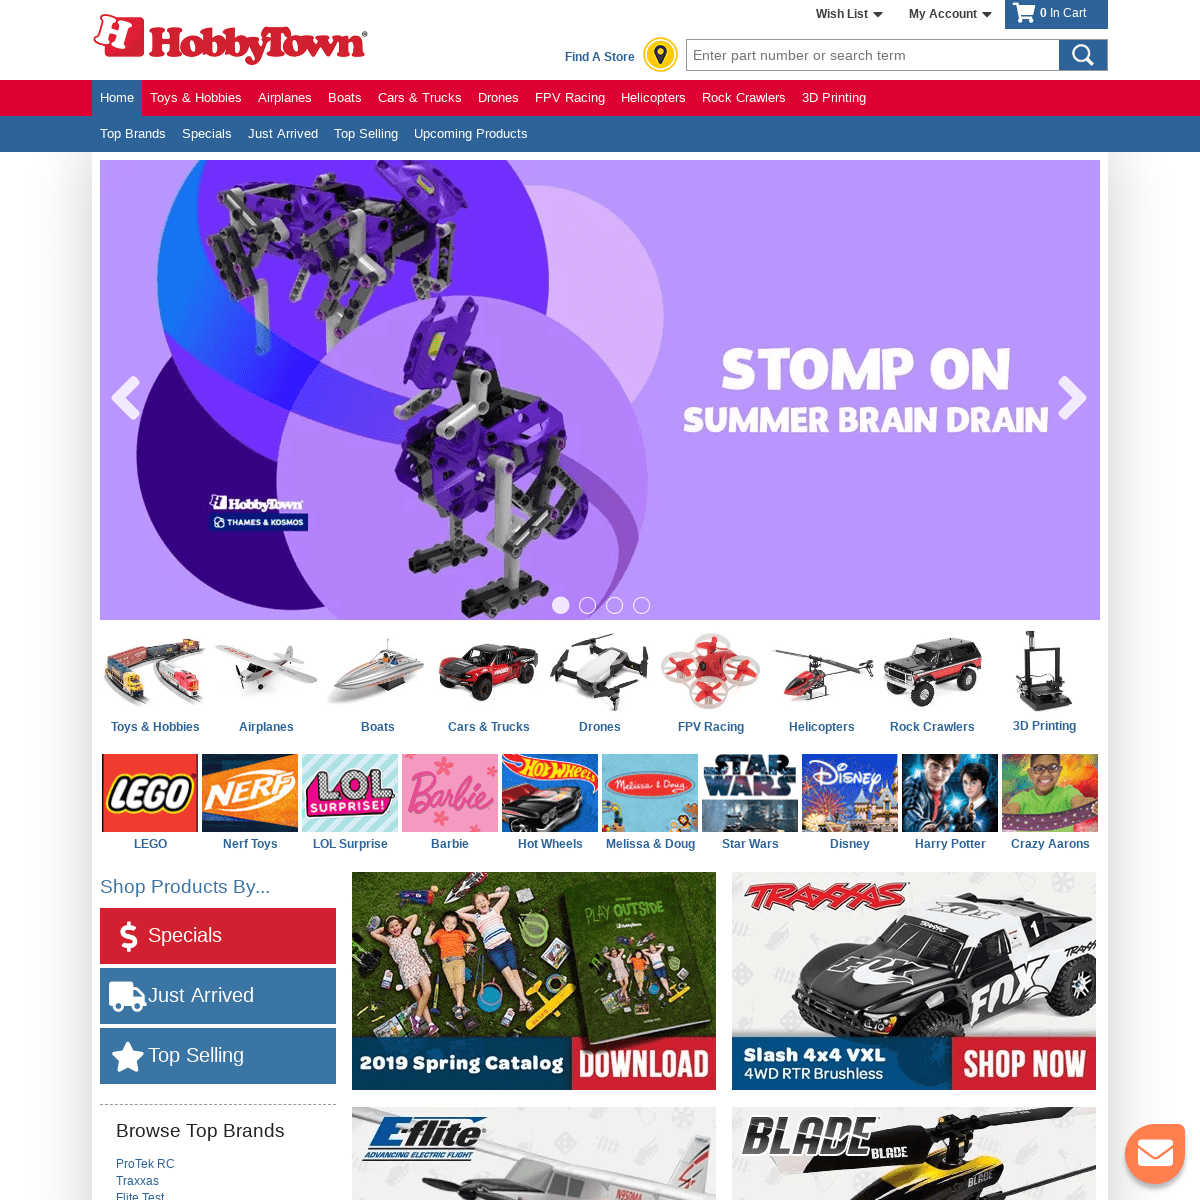 HobbyTown® - Shop for Toys, Games, Radio Control, Models, Rockets & More